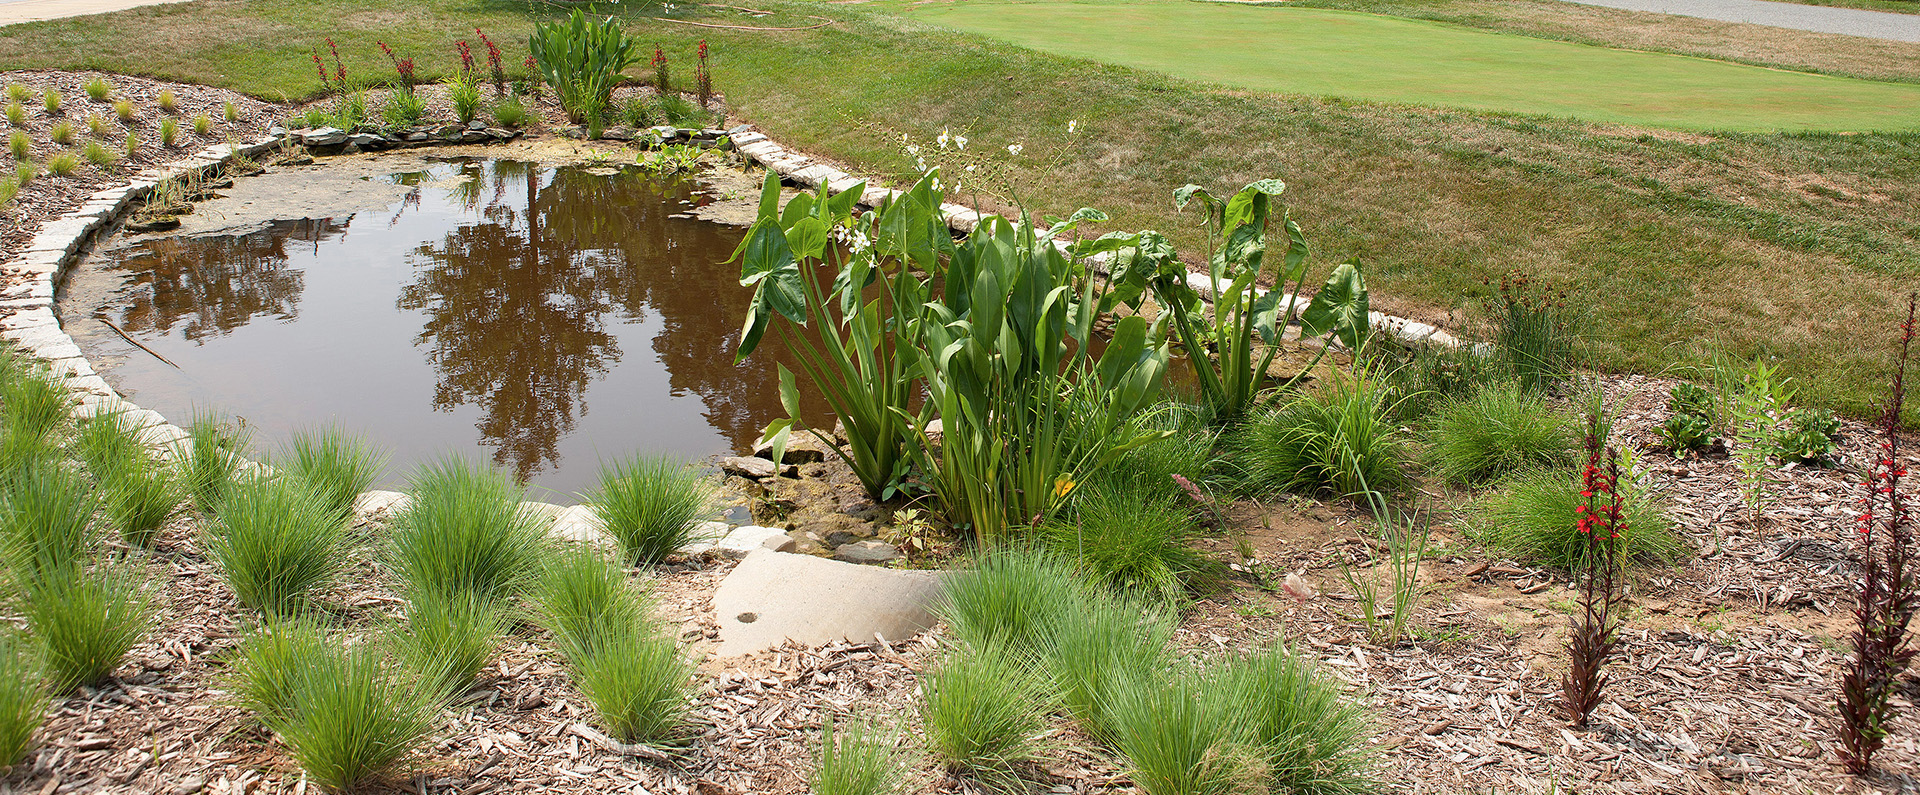 Turfgrass growing around a small pond in an exhibit at the U.S. National Arboretum 